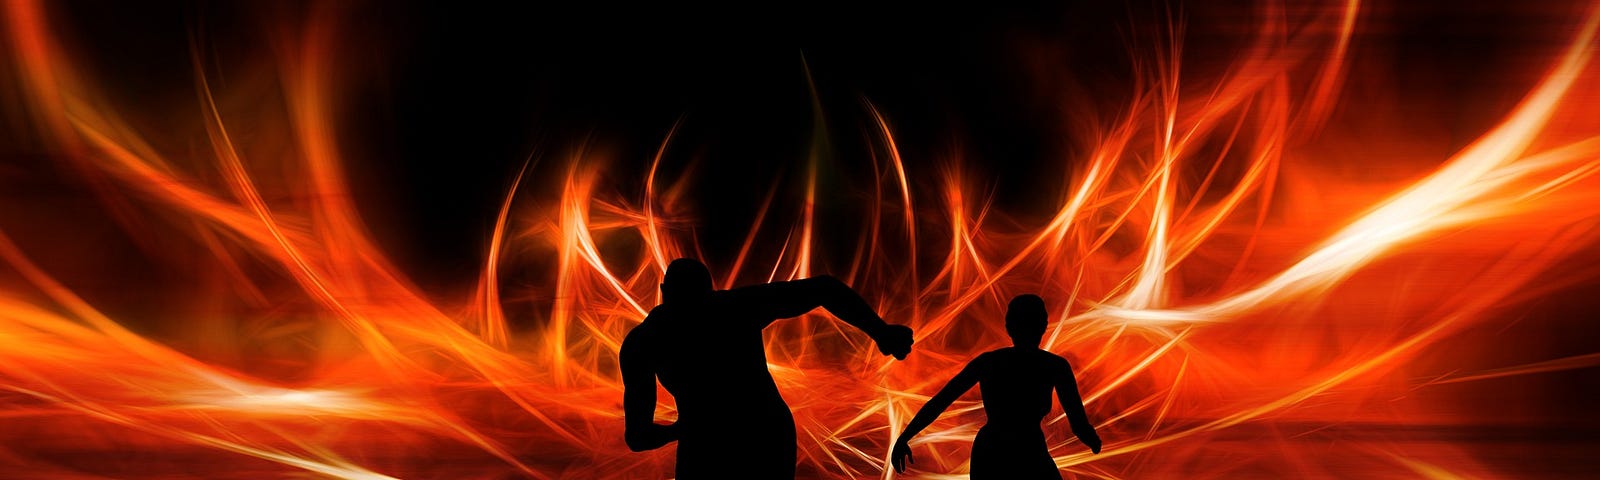 A silhouette of 2 people running away from a spreading fire.